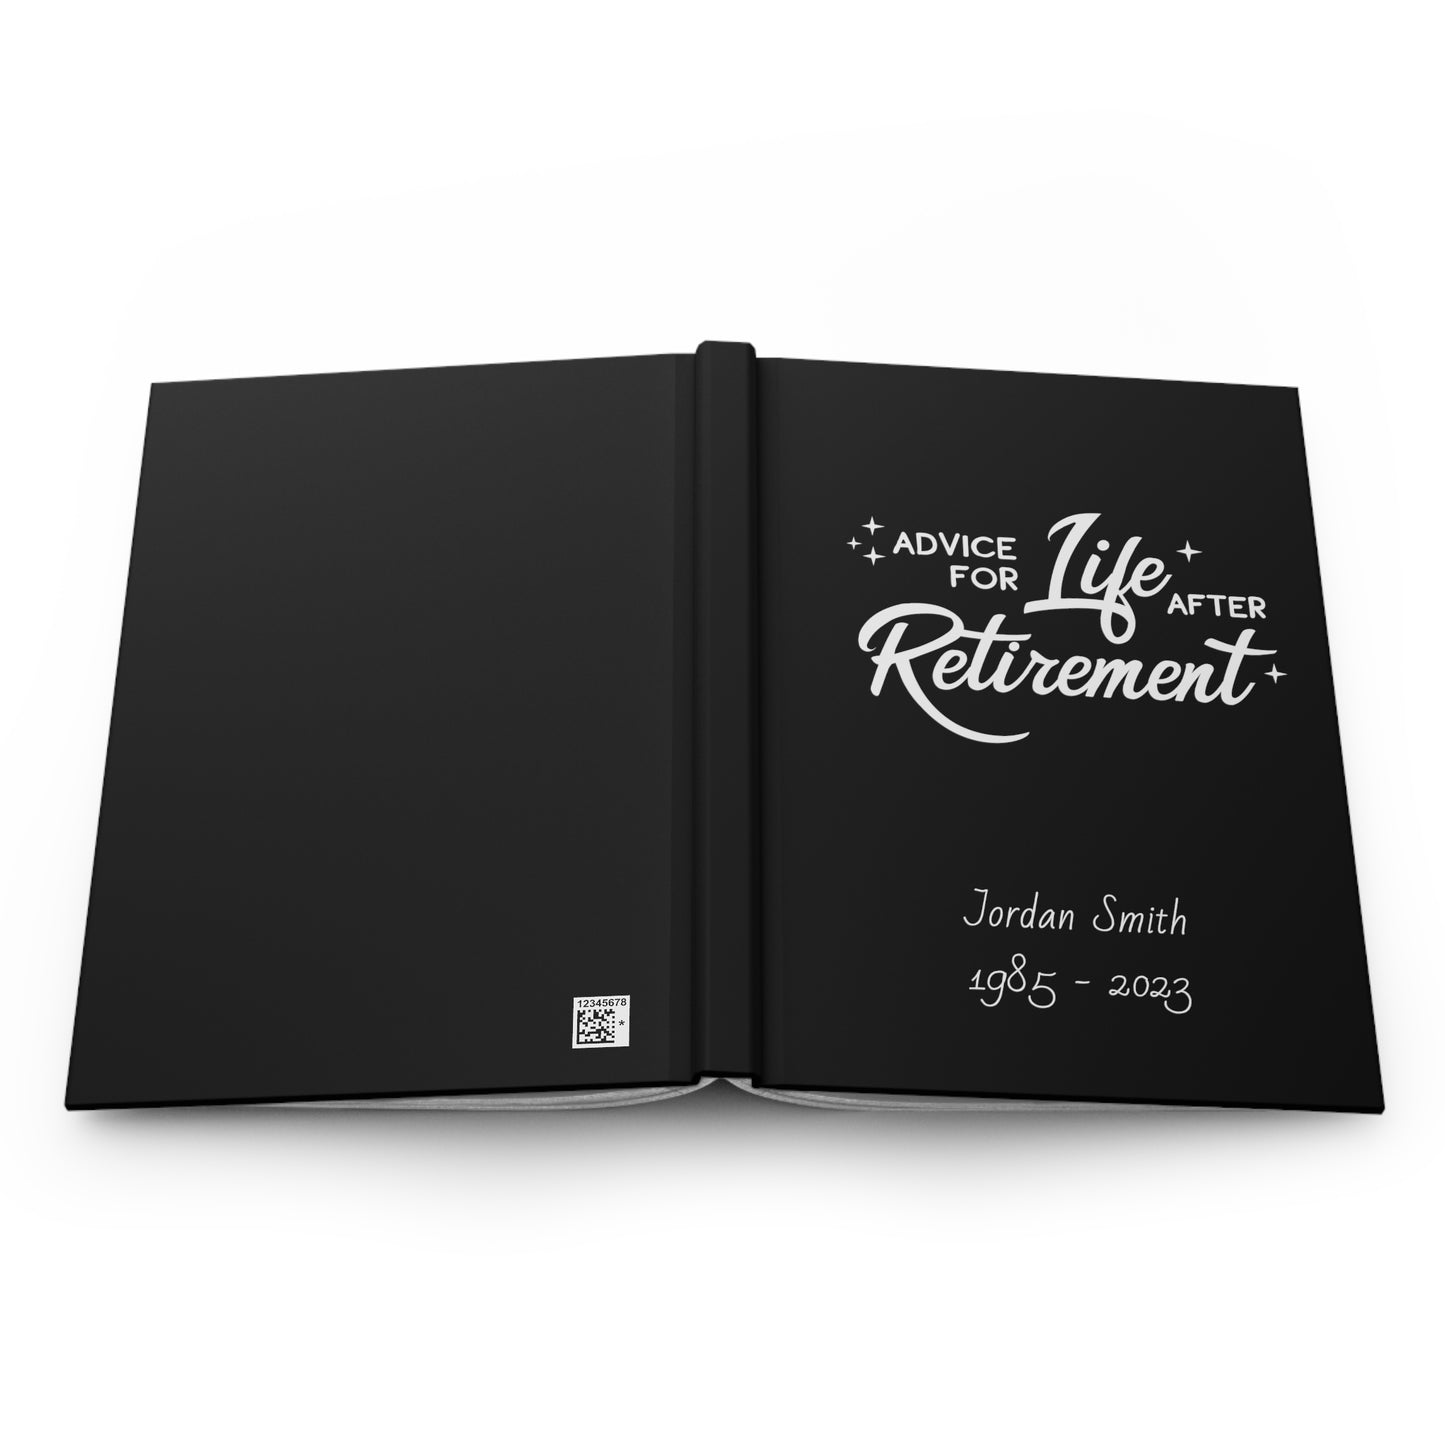 Retirement Party Guest Book, Retirement Gift, Book to Sign, Retired Gift, Happy Retirement